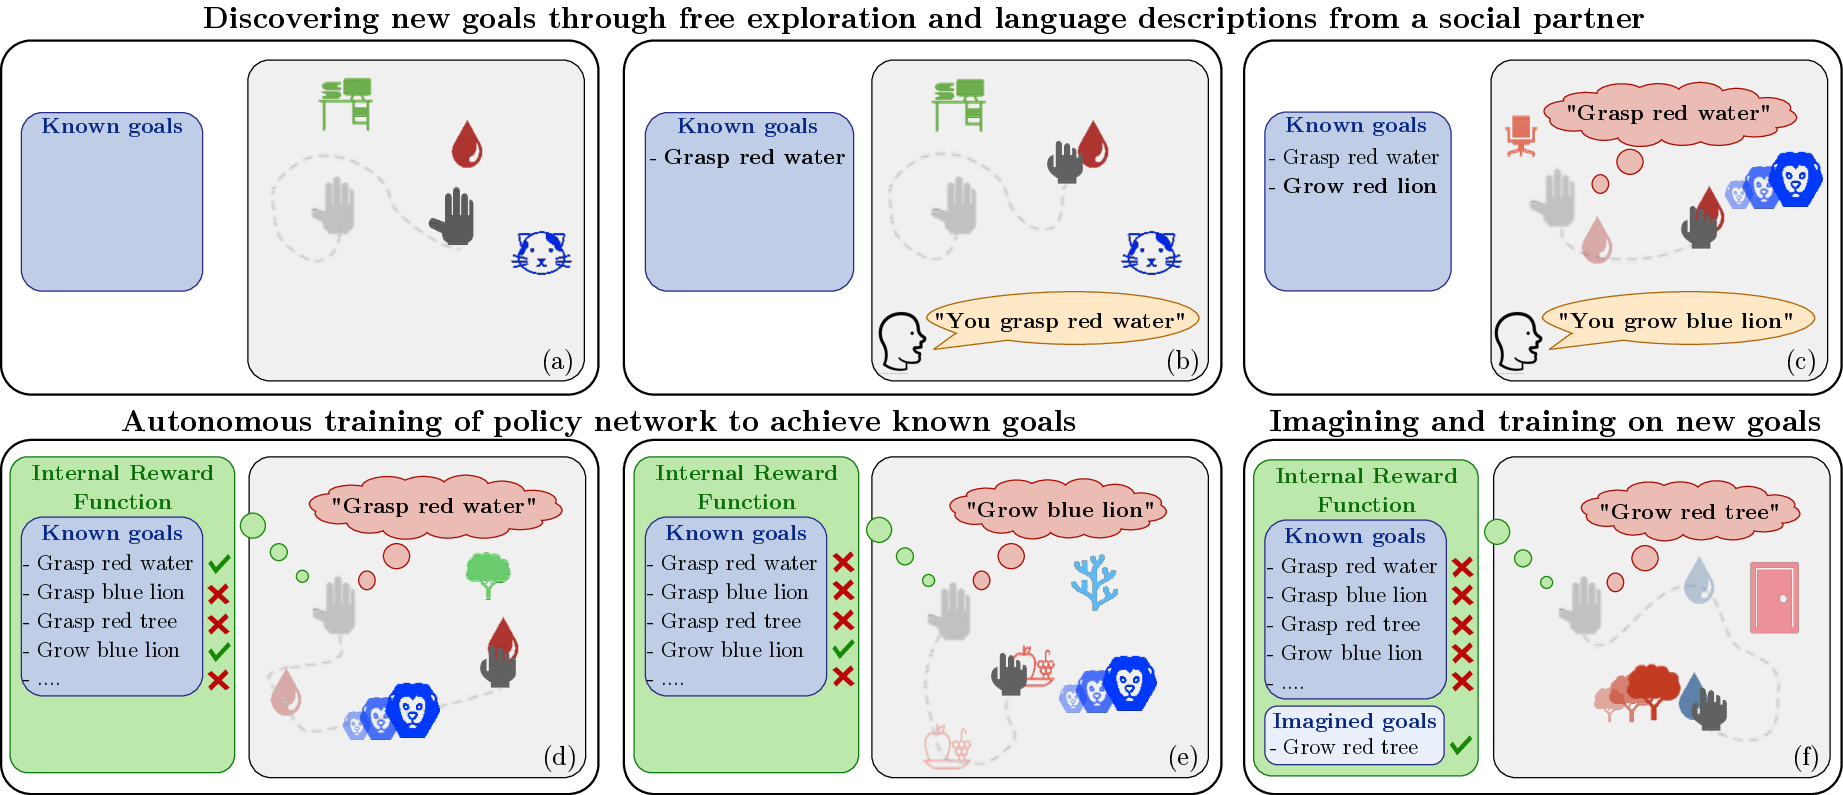 IMAGINE overview. In the Playground environment, the agent (hand) can move, grasp objects and grow some of them. Scenes are generated procedurally with objects of different types, colors and sizes. A social partner provides descriptive feedback (orange), that the agent converts into targetable goals (red bubbles).